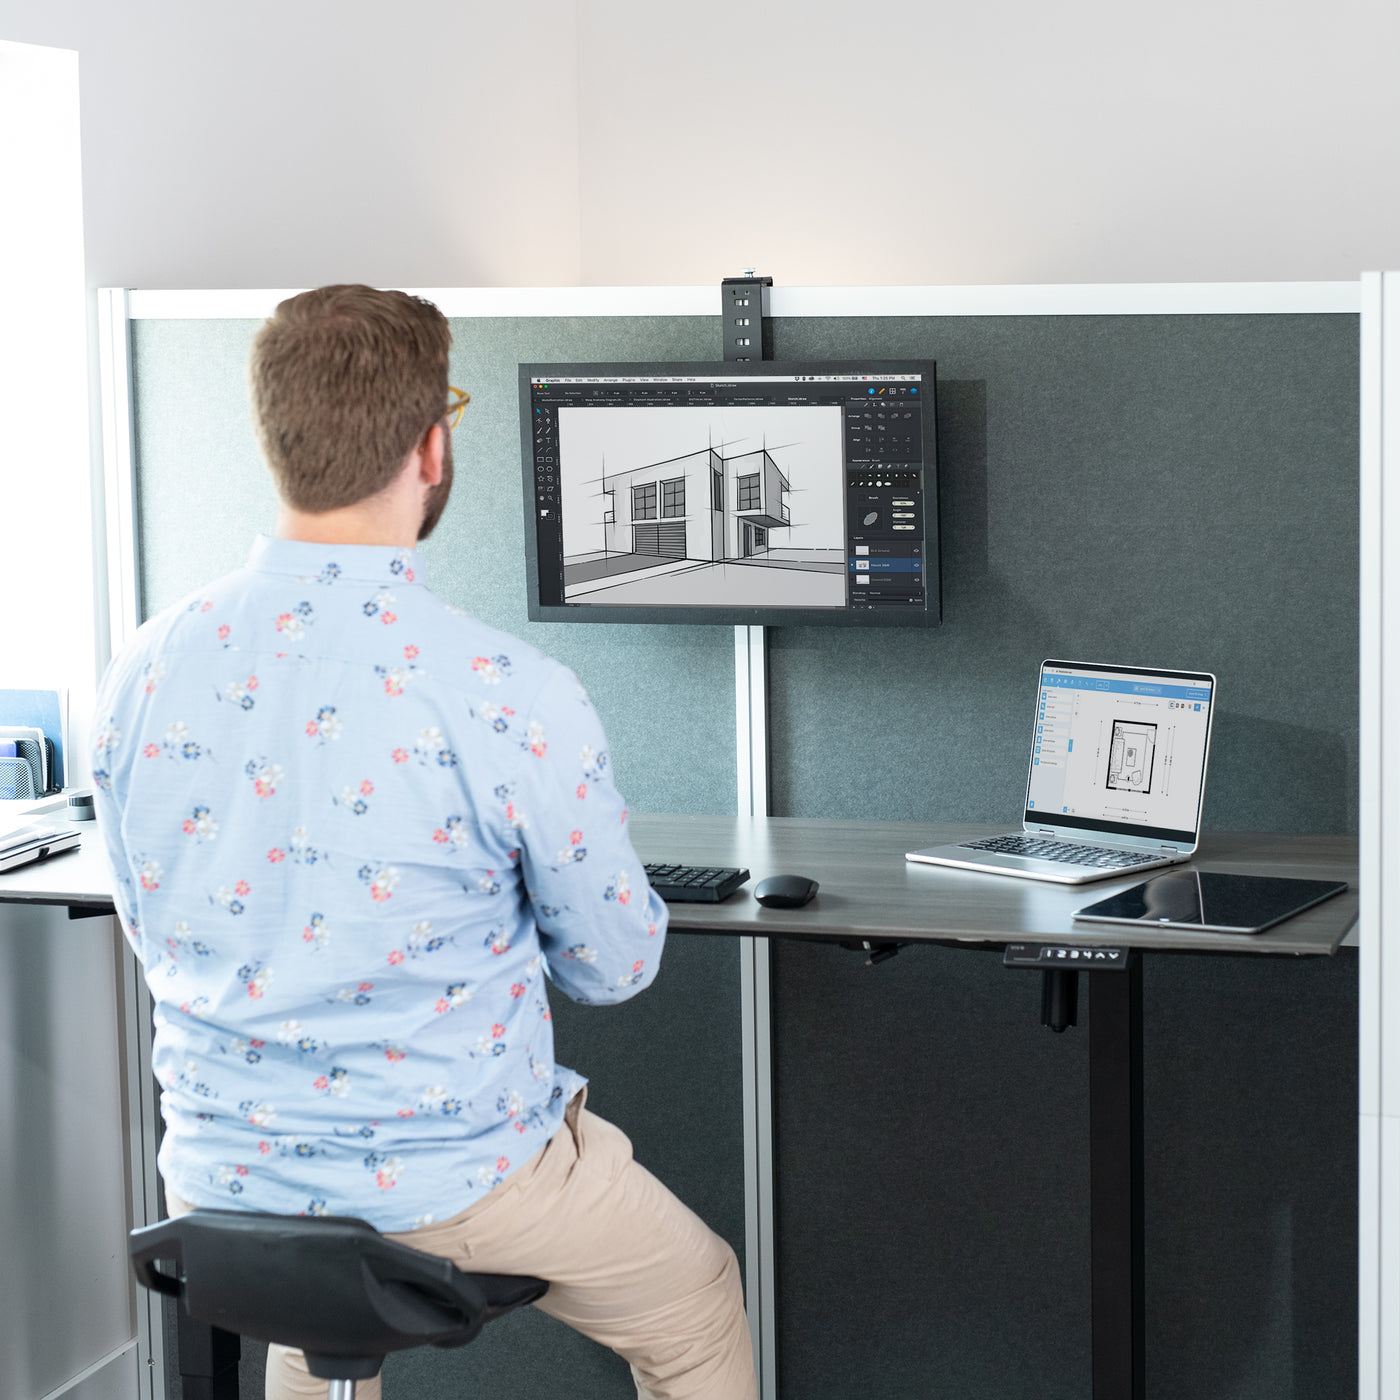 Cubicle Monitor Mount displays your screen at a comfortable angle in a work cubicle.